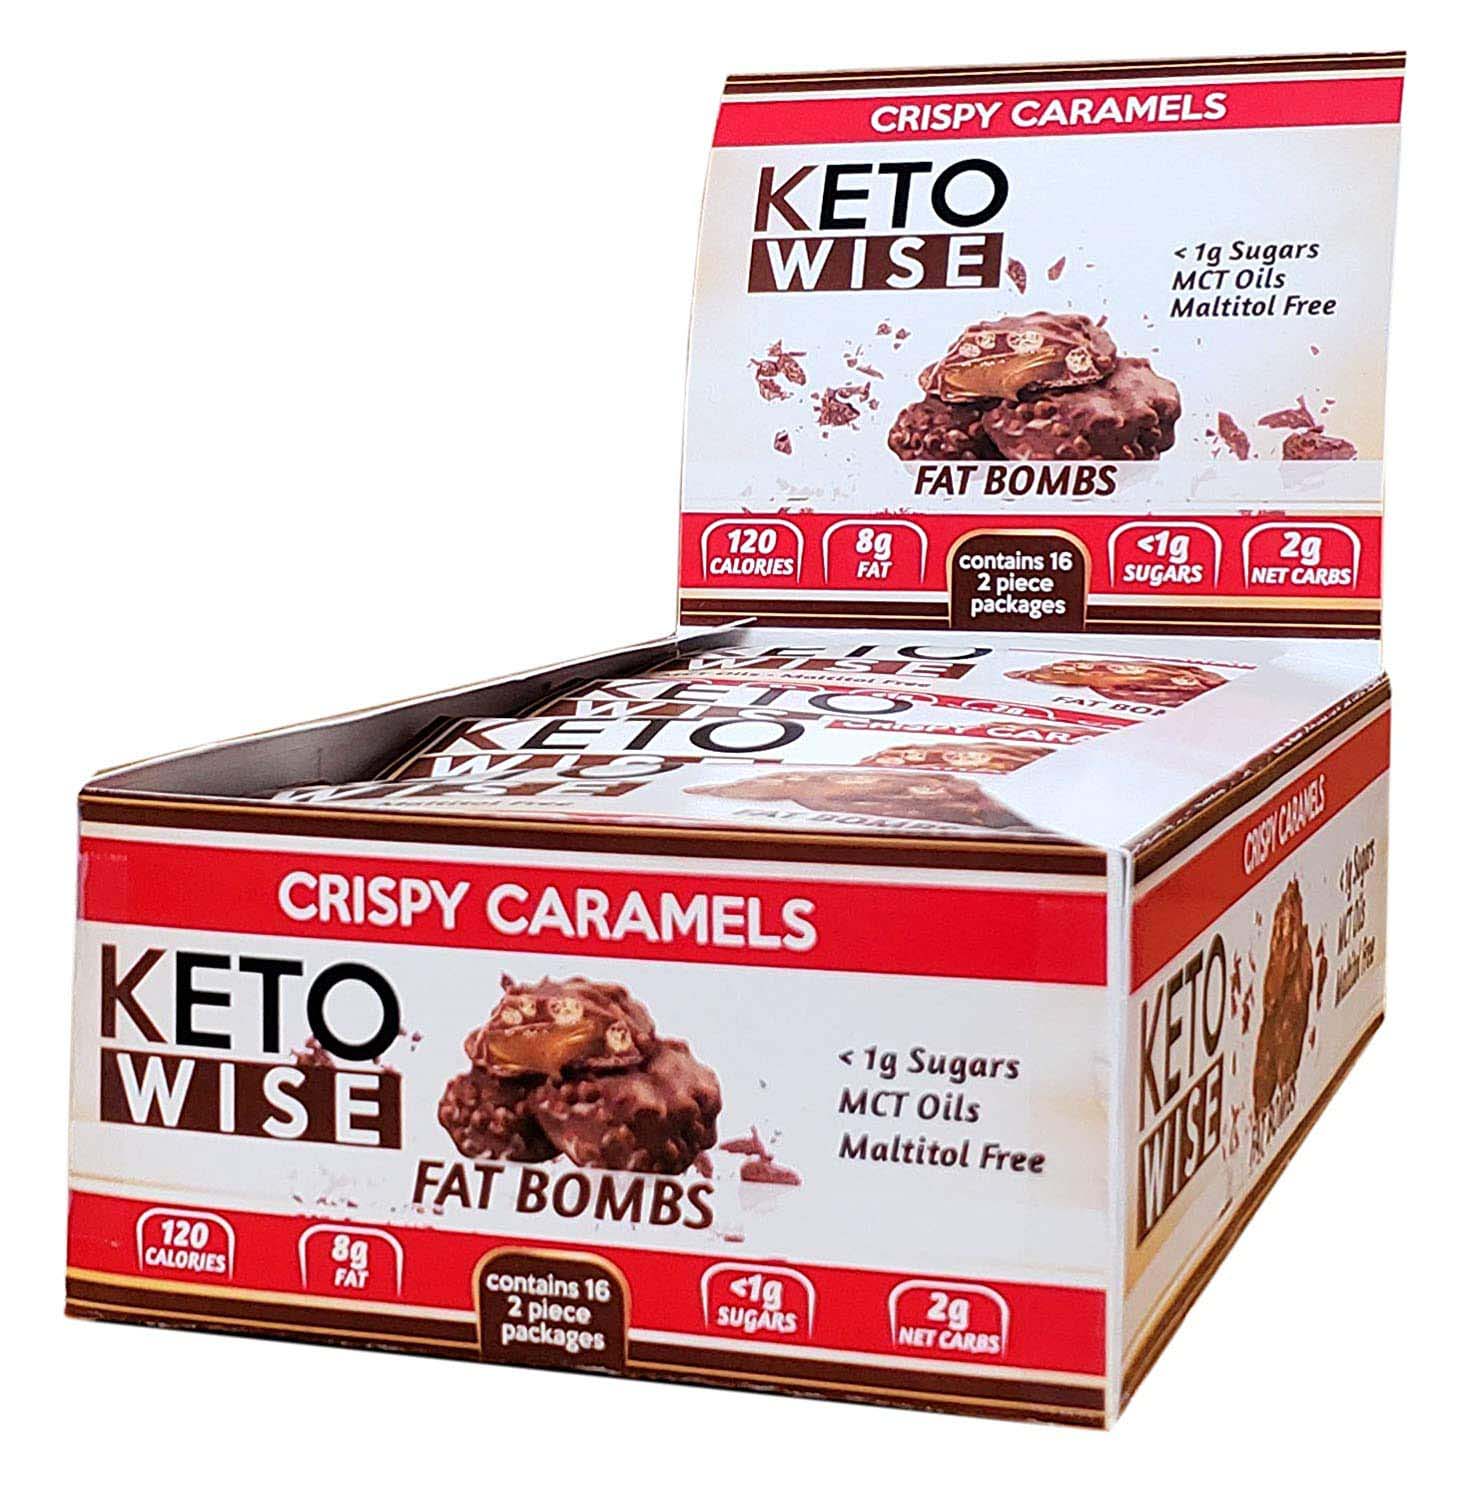 Keto Wise Fat Bombs Box of 16 Pieces Crispy Caramels